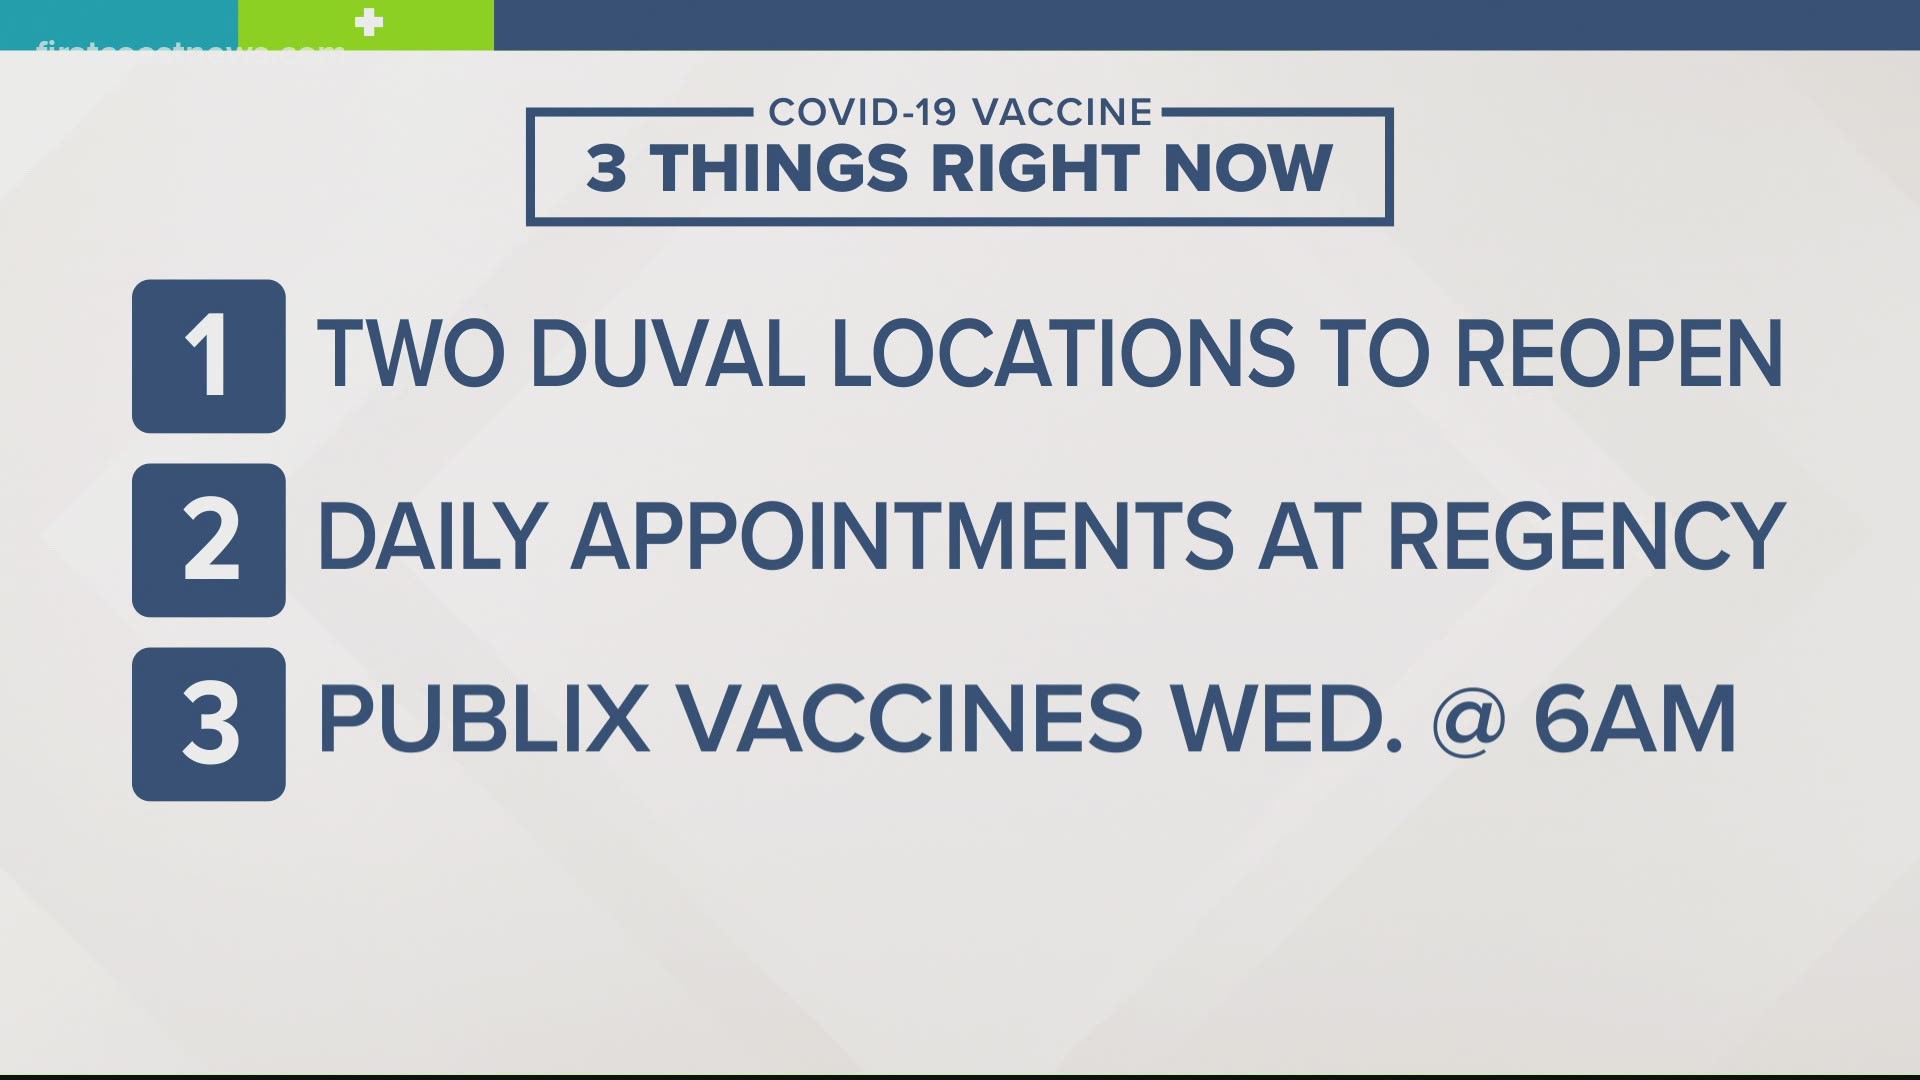 Here are three things you need to know about the COVID-19 vaccine.